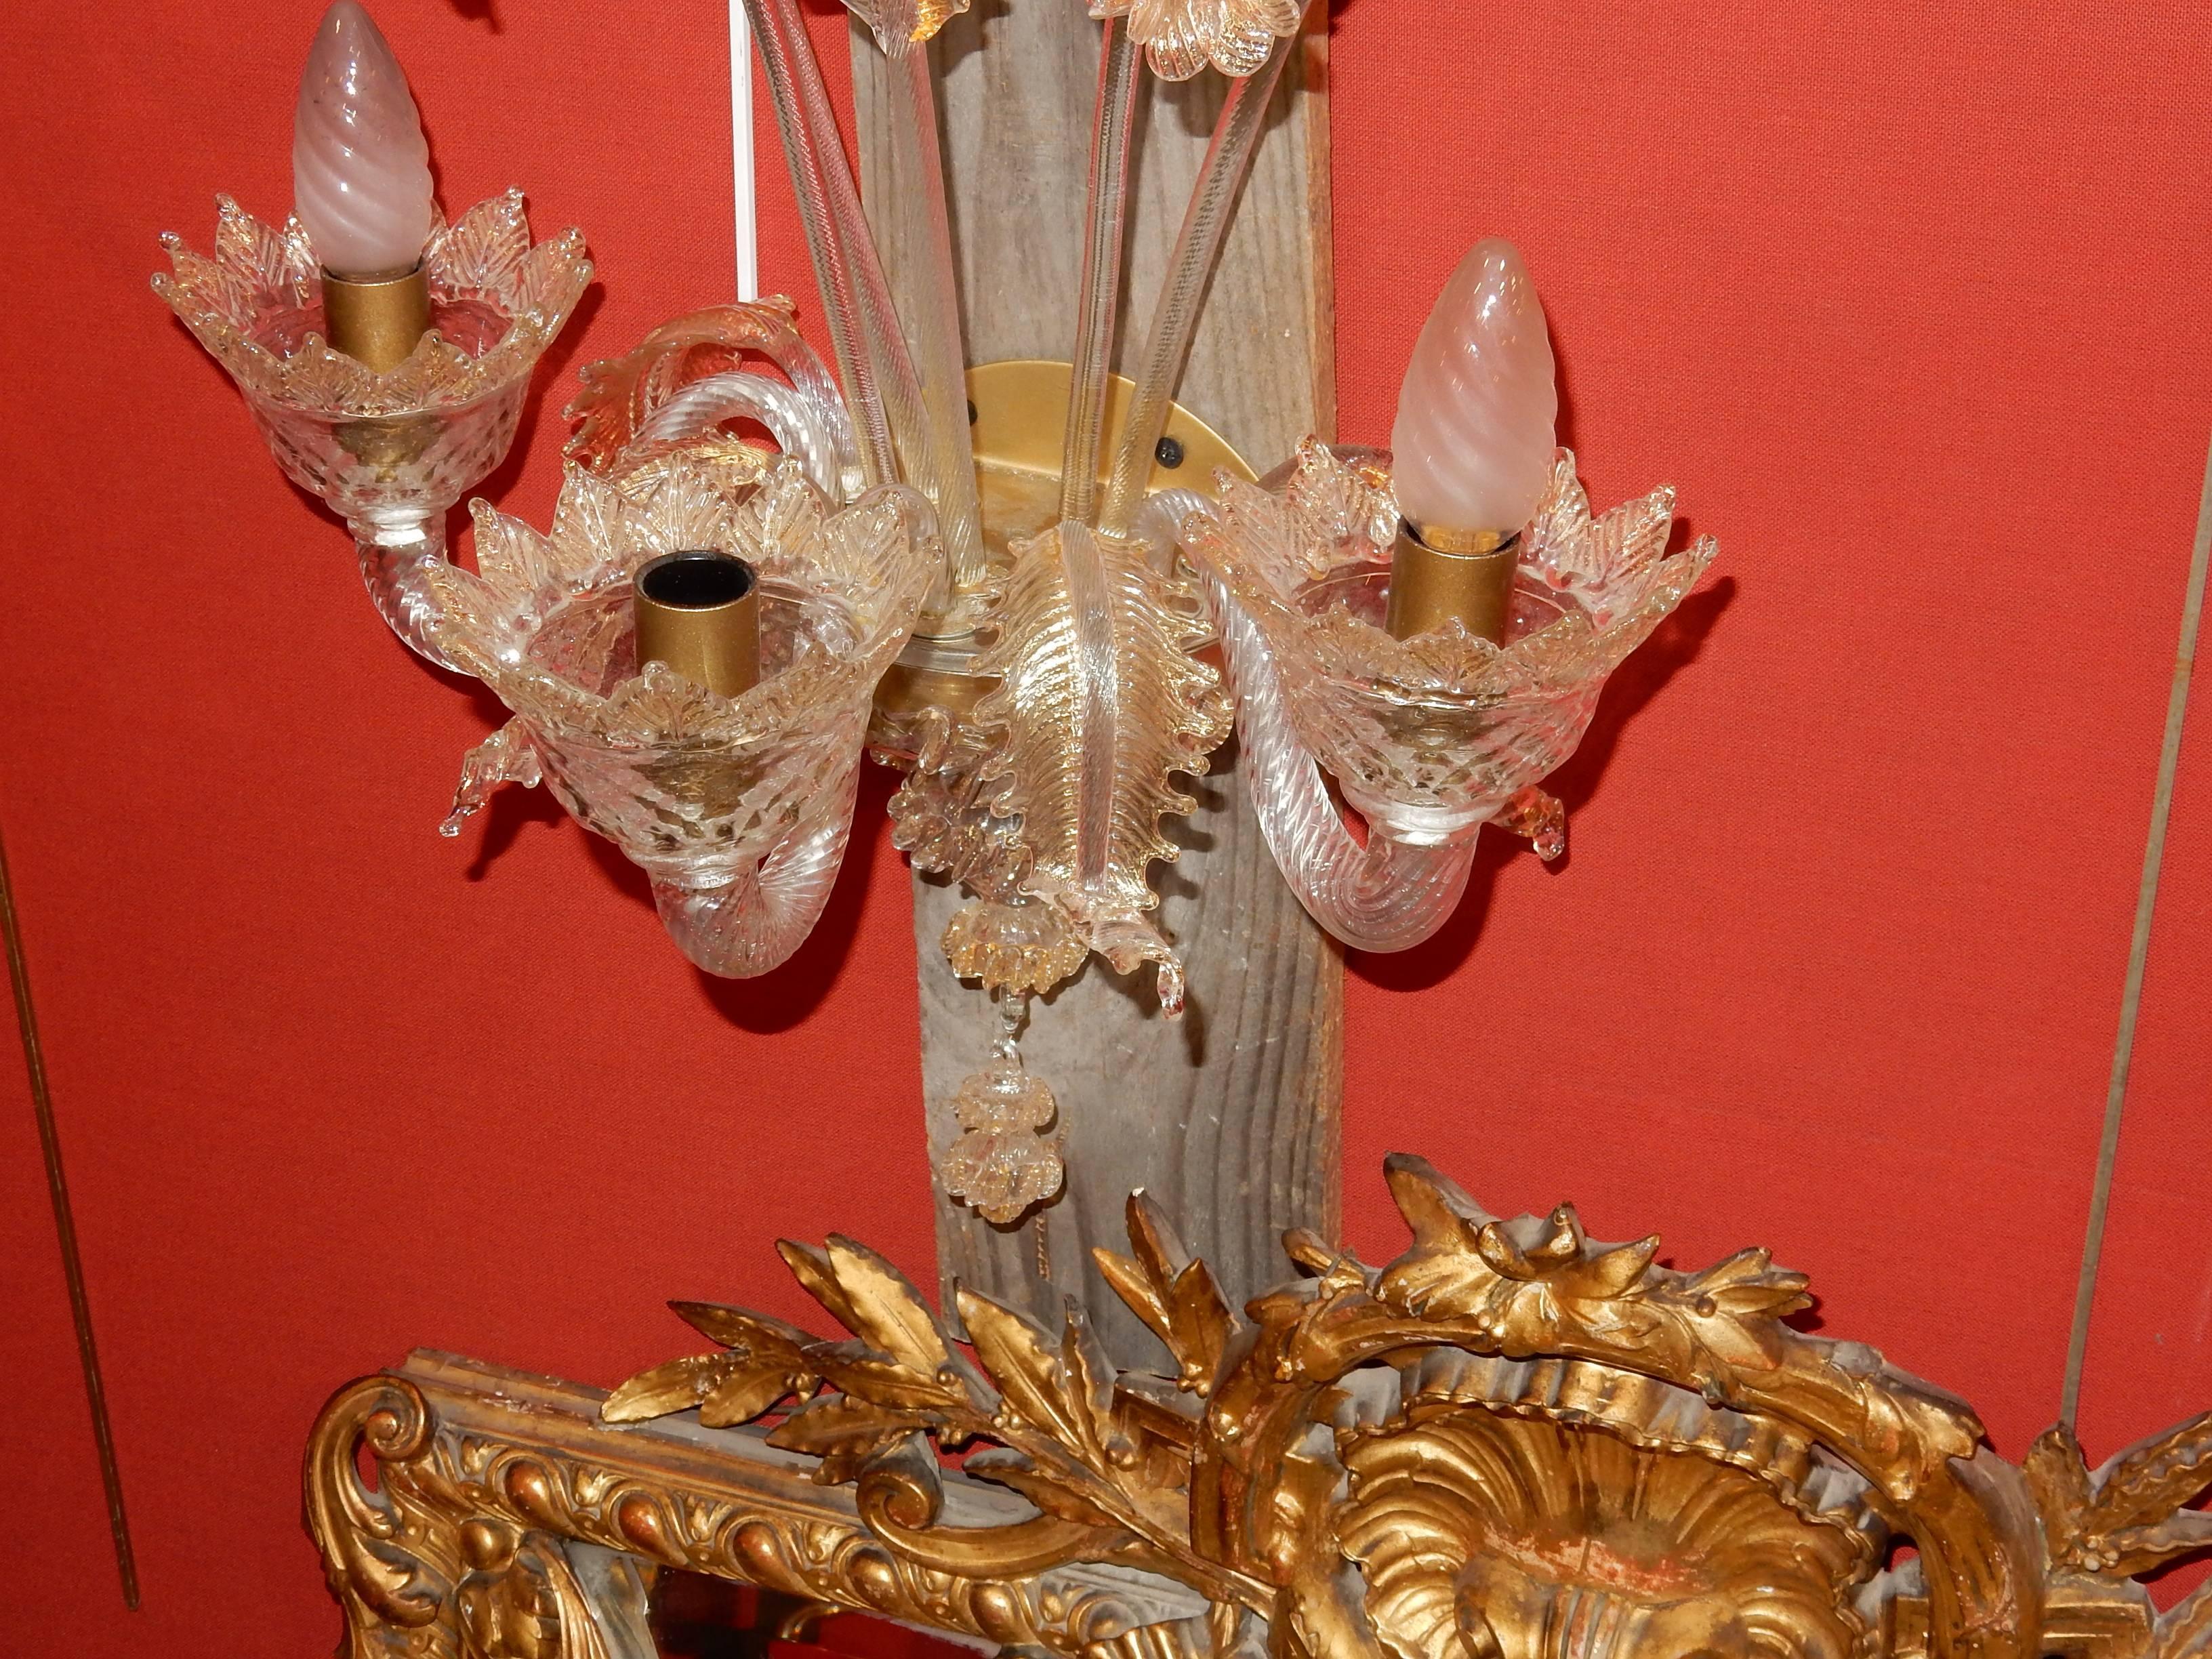 Gilt Three Wall Lamps Has Three Arms of Light, Crystal of Murano, Straws of Gold For Sale